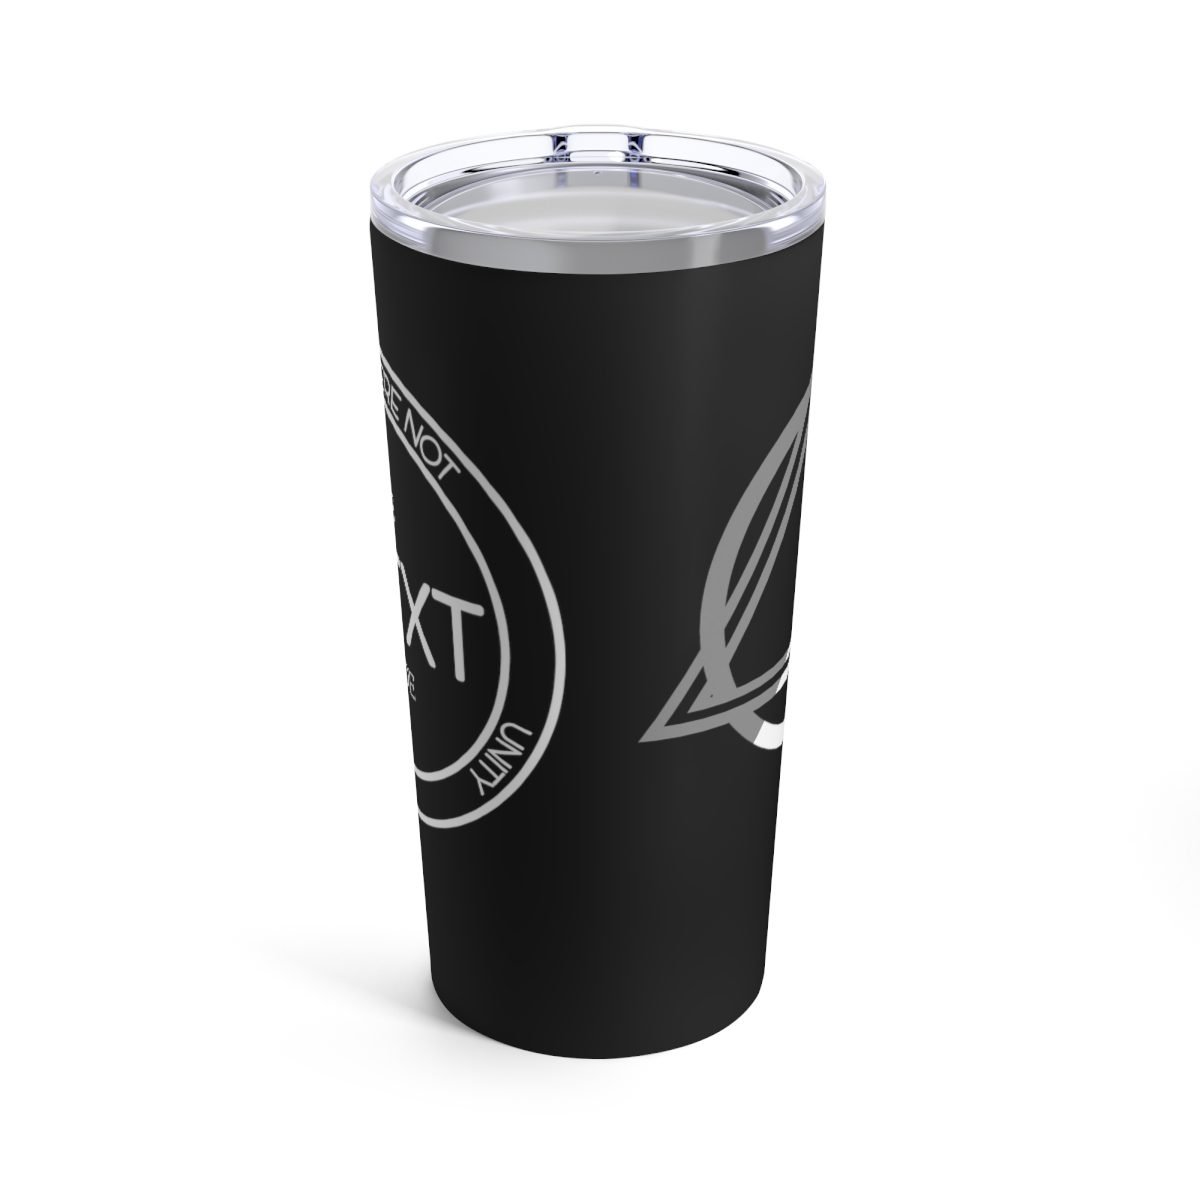 Context – The Divide 20oz Stainless Steel Tumbler